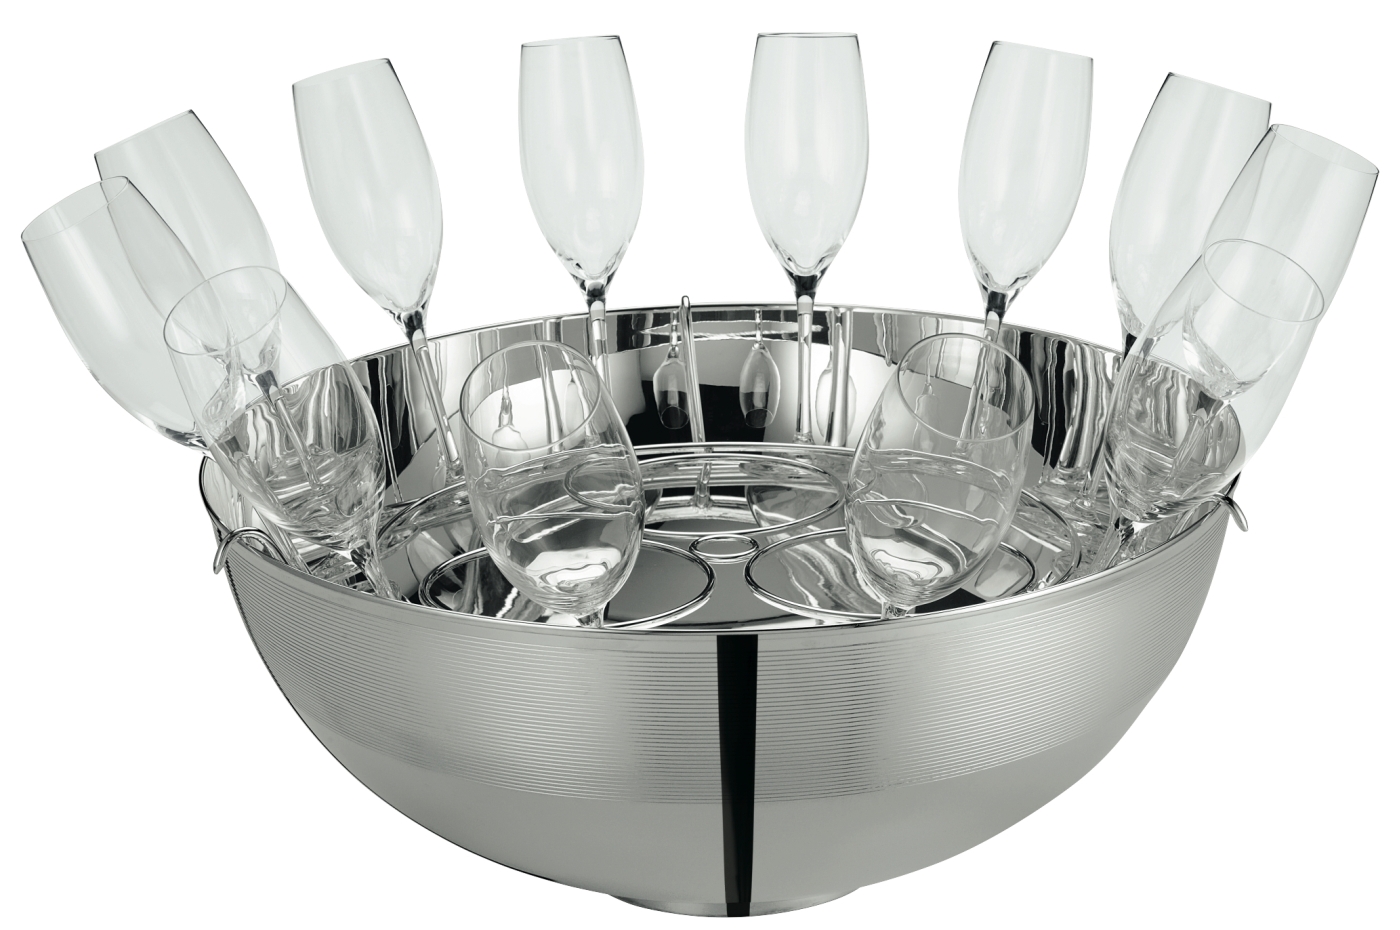 Champagne set 12 glasses in silver plated - Ercuis